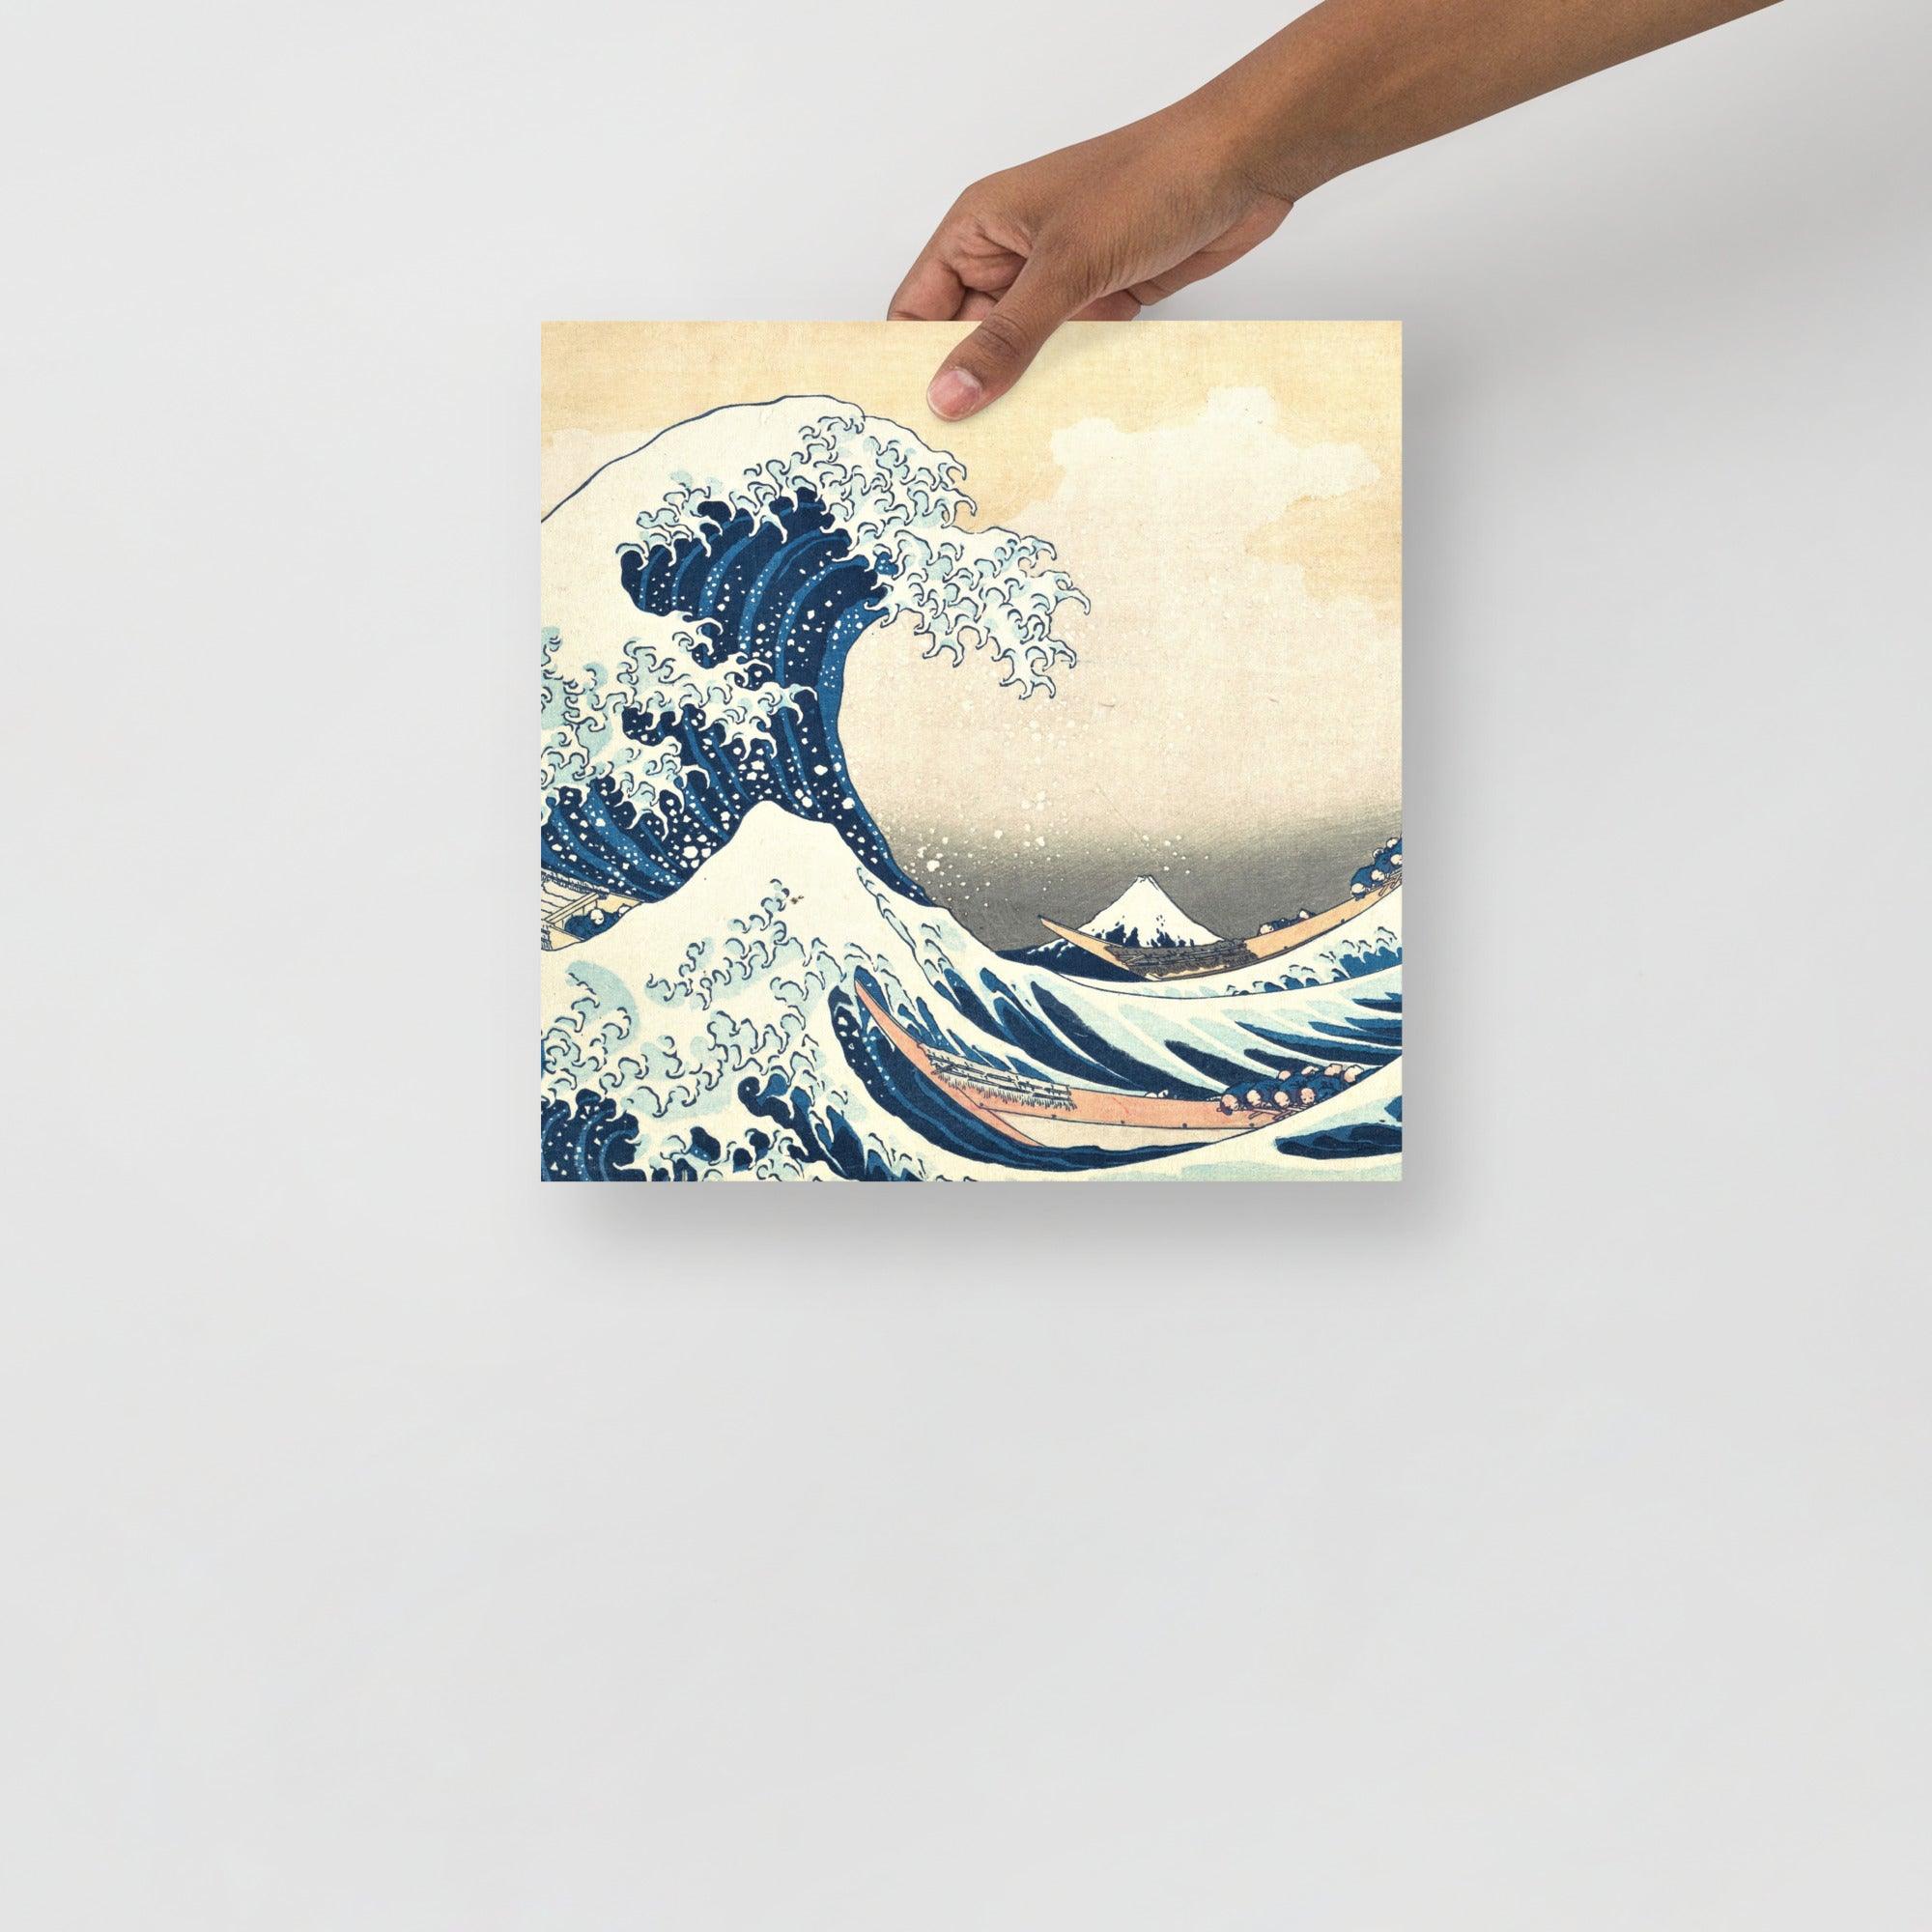 The Great Wave off Kanagawa by Hokusai poster on a plain backdrop in size 12x12”.